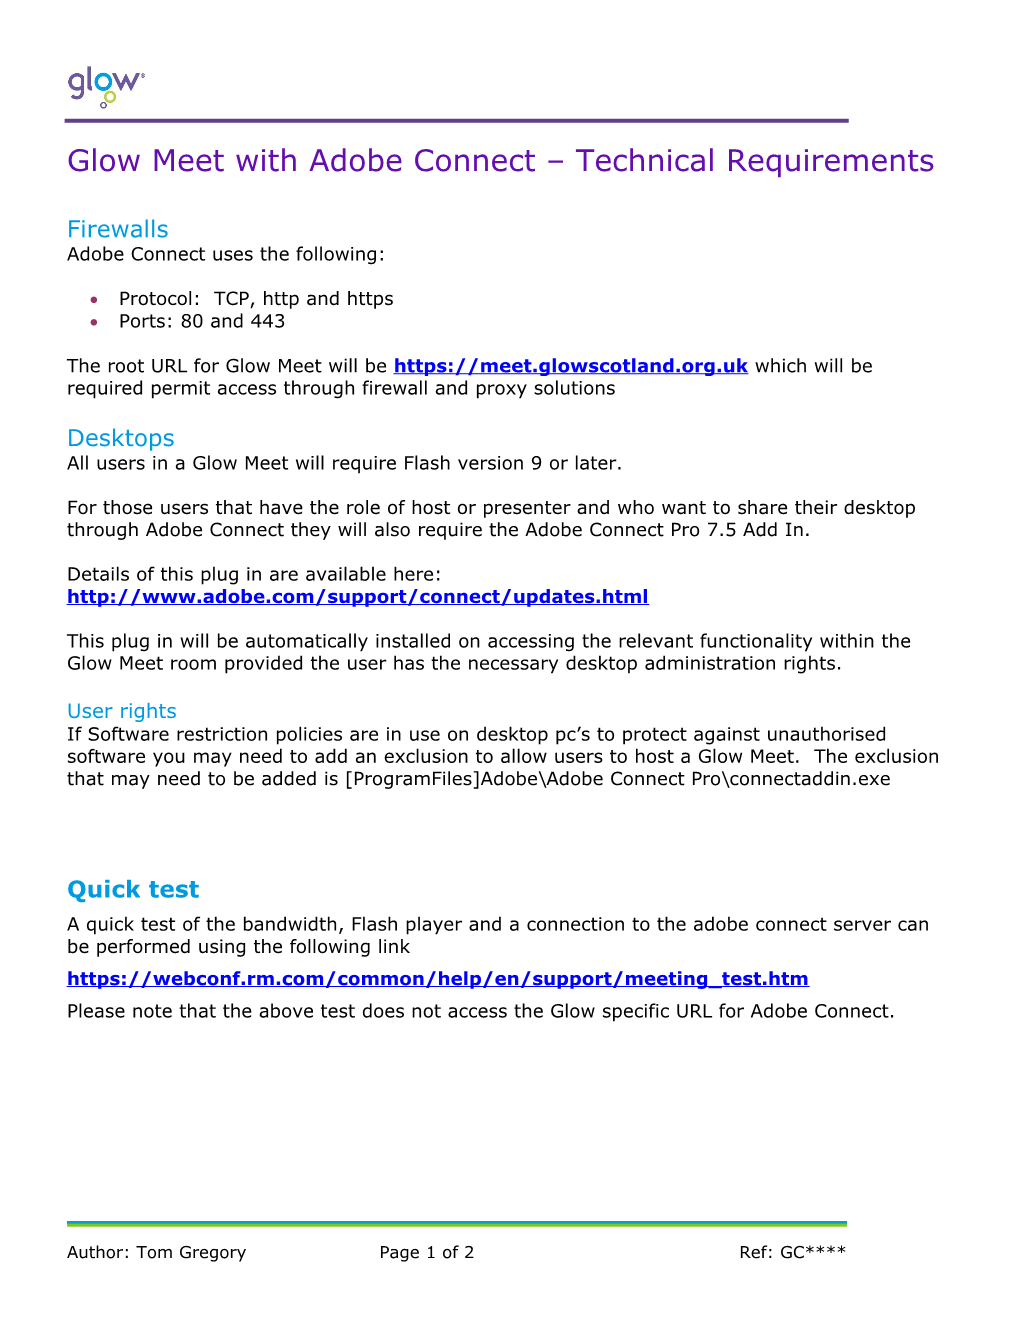 Glowmeet with Adobe Connect Technical Requirements